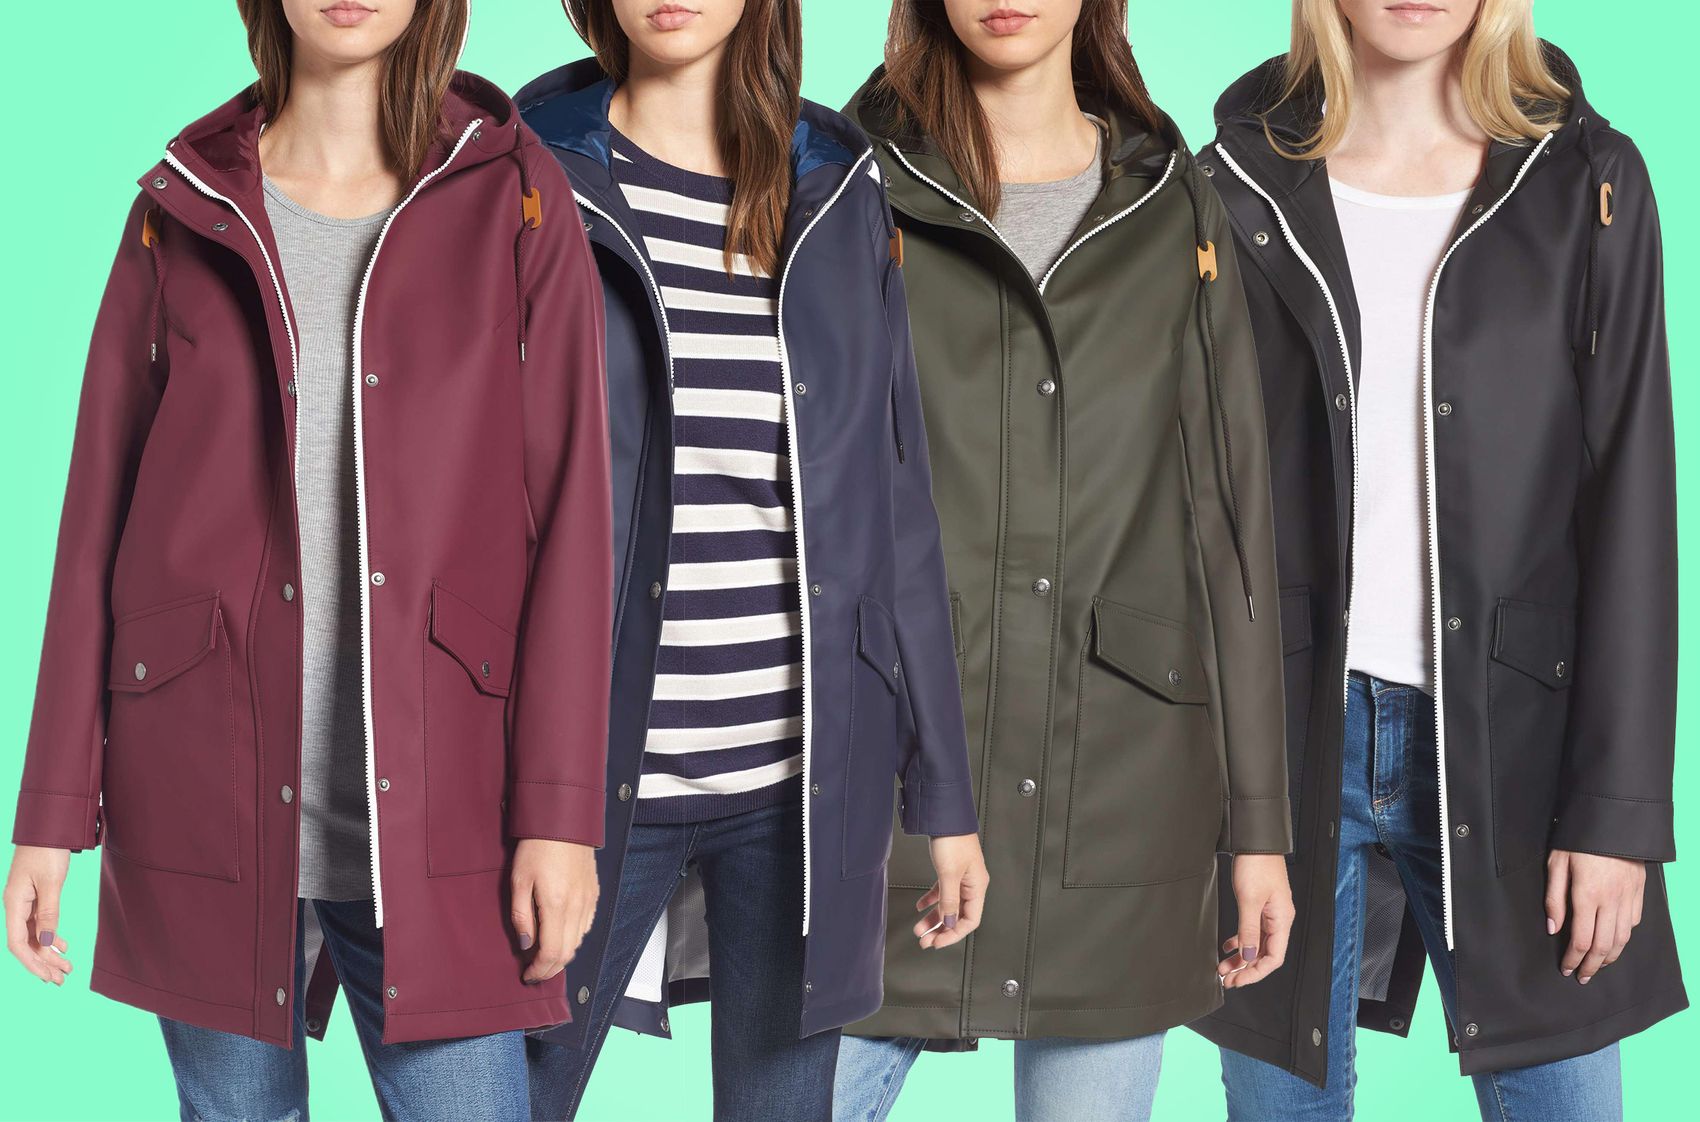 Women’s Raincoat on Sale at Nordstrom 2017